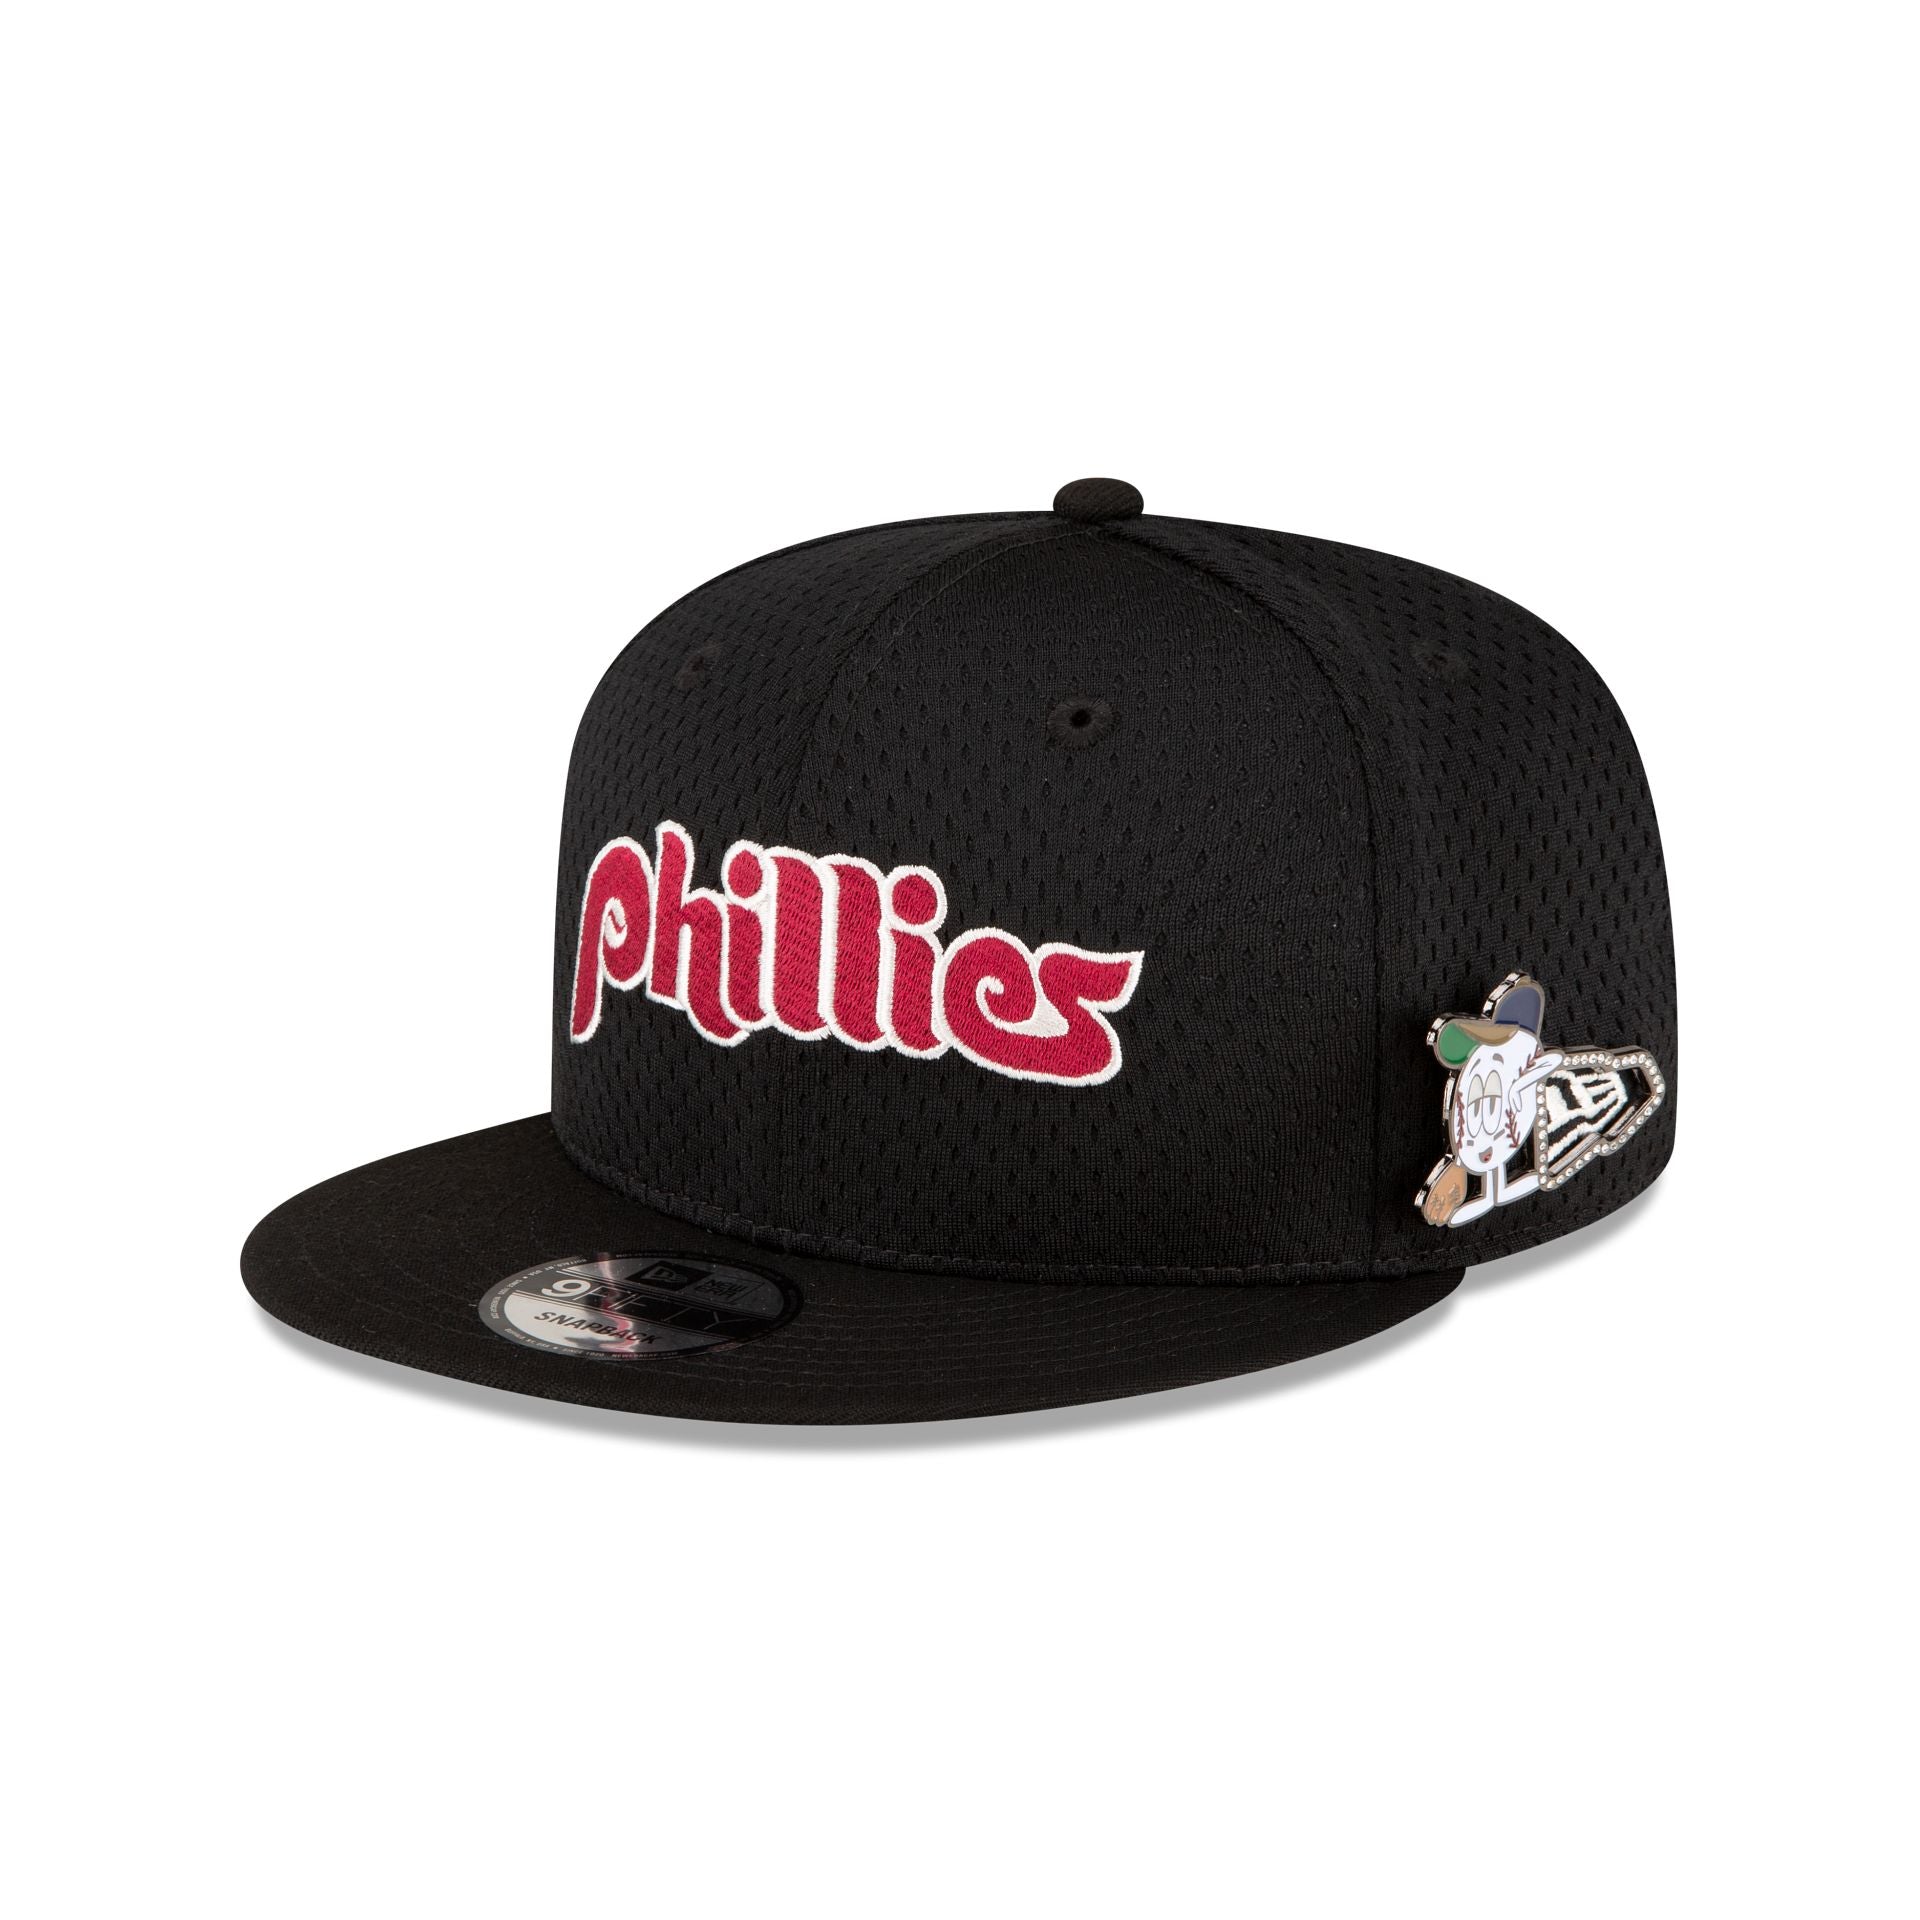 Pin by New Era Cap on MLB  Hat outfit men, Outfits with hats, New